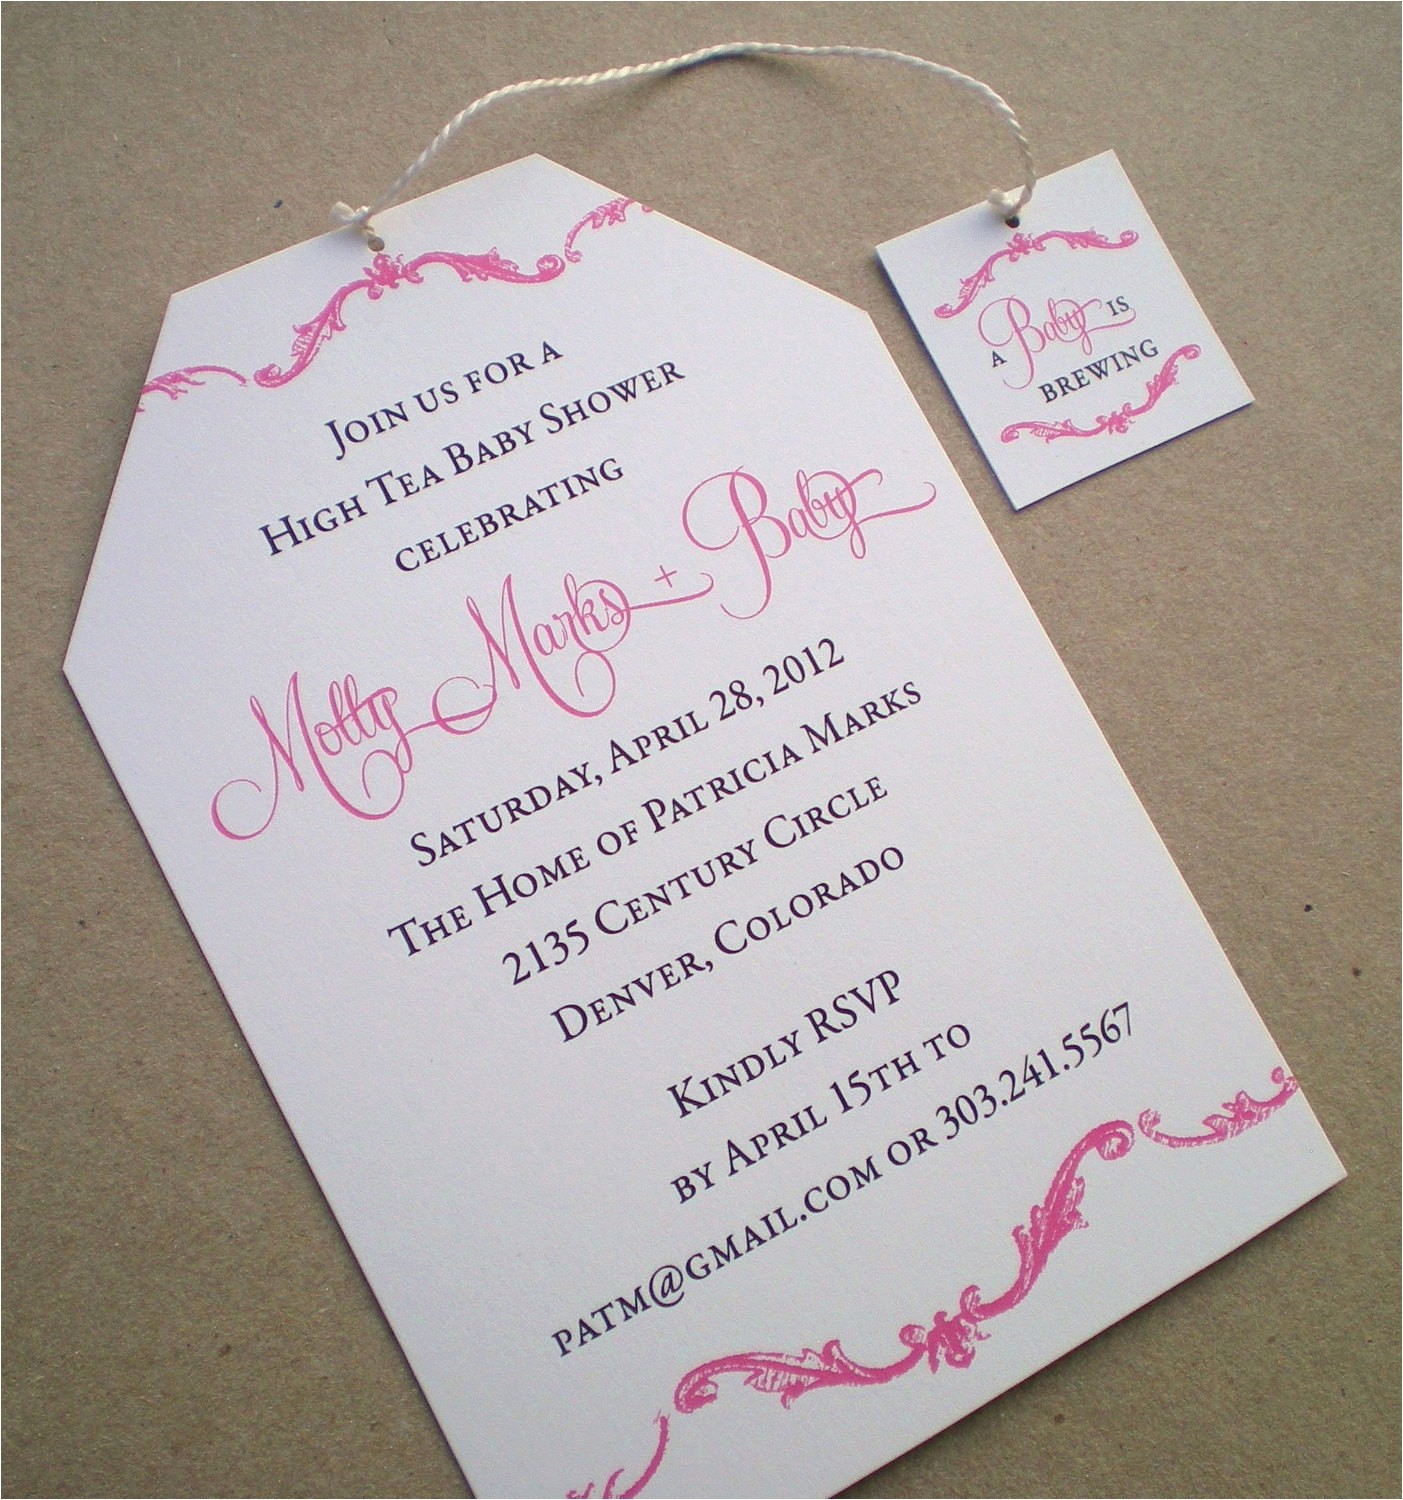 Afternoon Tea Baby Shower Invitations Baby Shower Invitations Baby Shower Invitation Wording